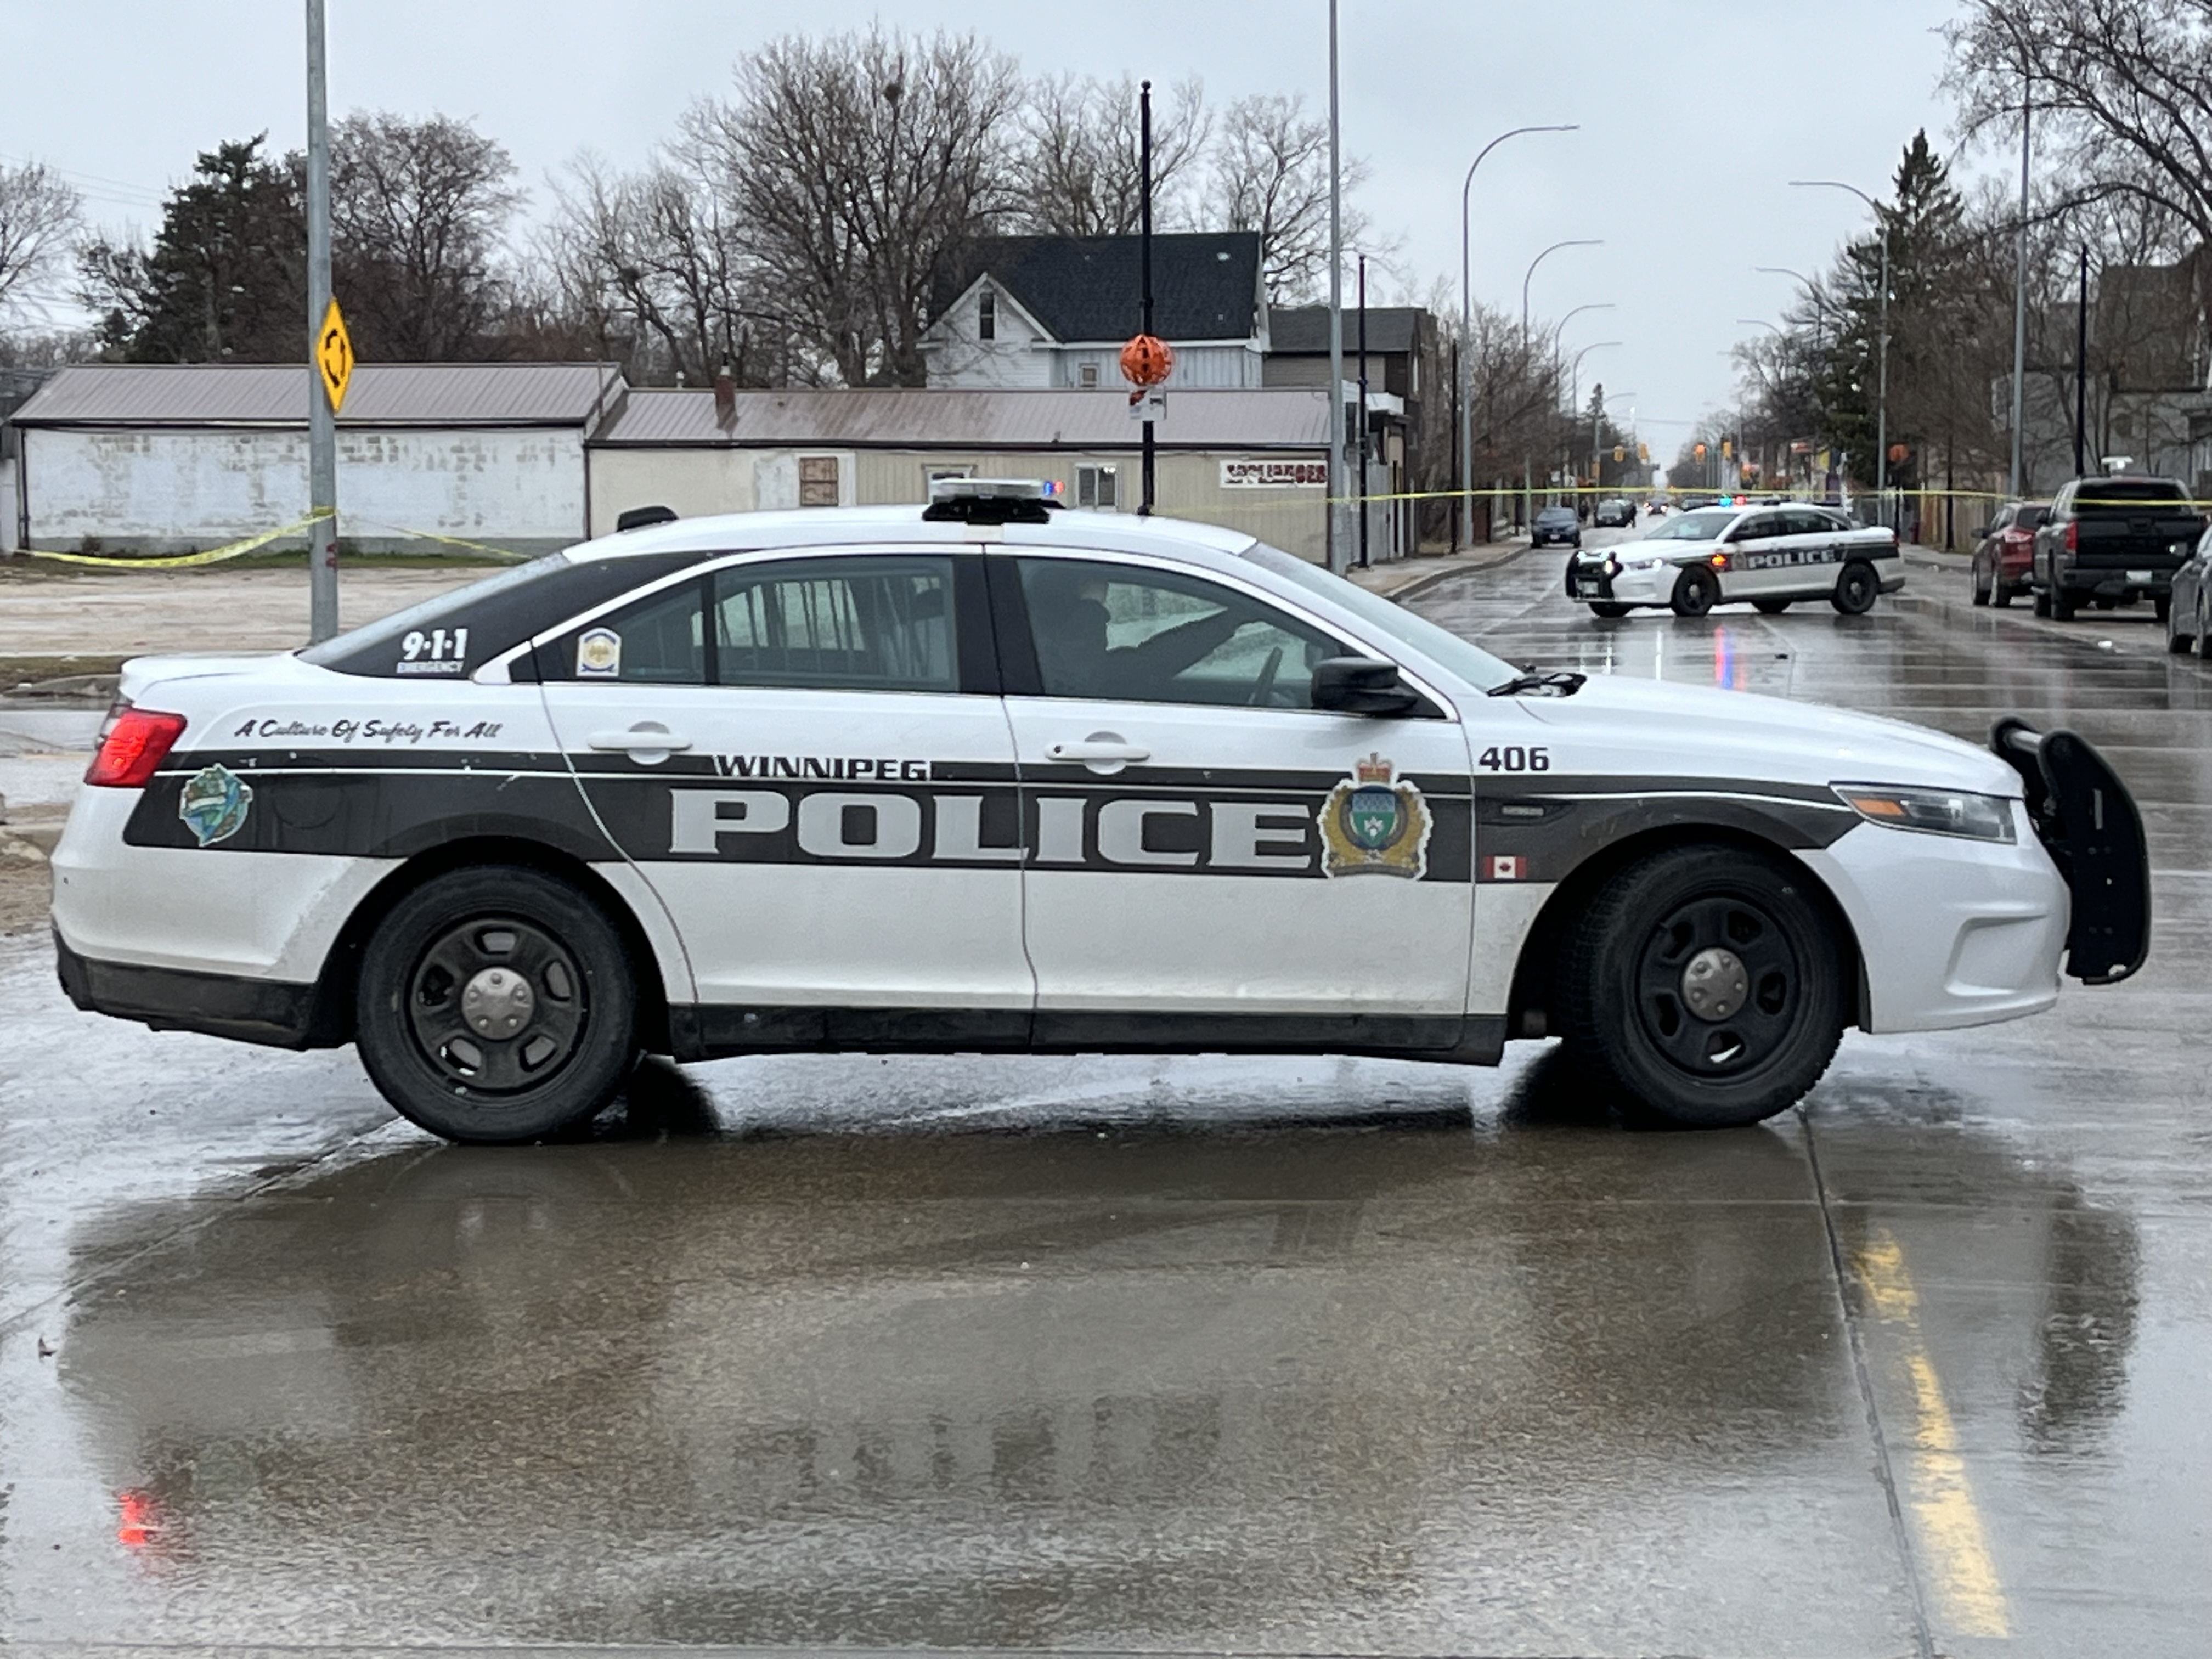 Arrest made in connection to homicide near Selkirk and McKenzie